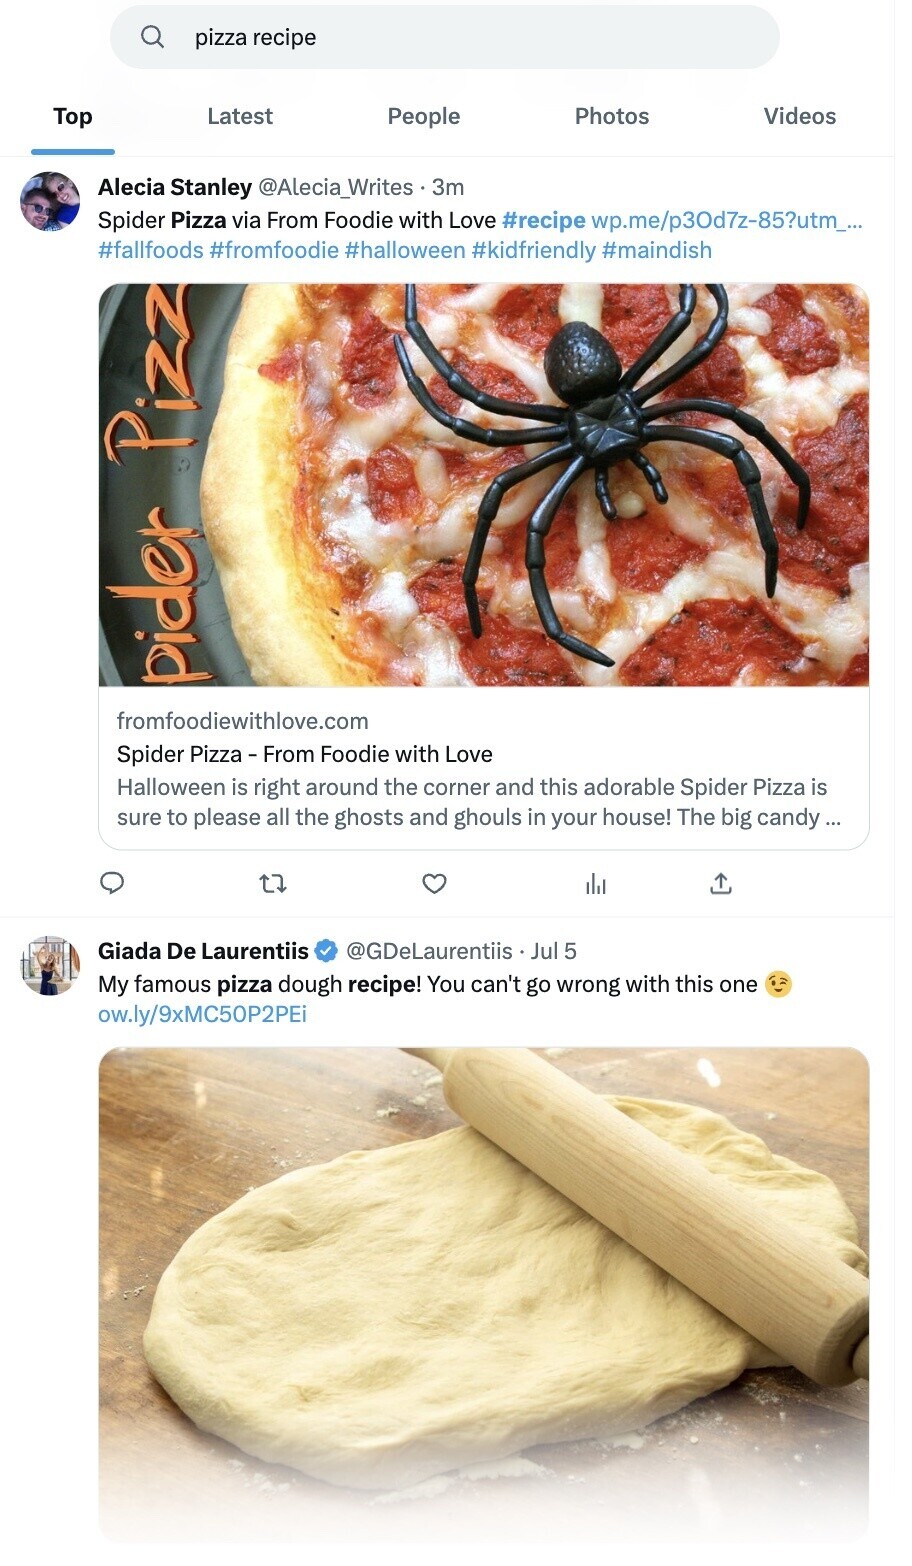 example of results for “pizza recipe” on Twitter